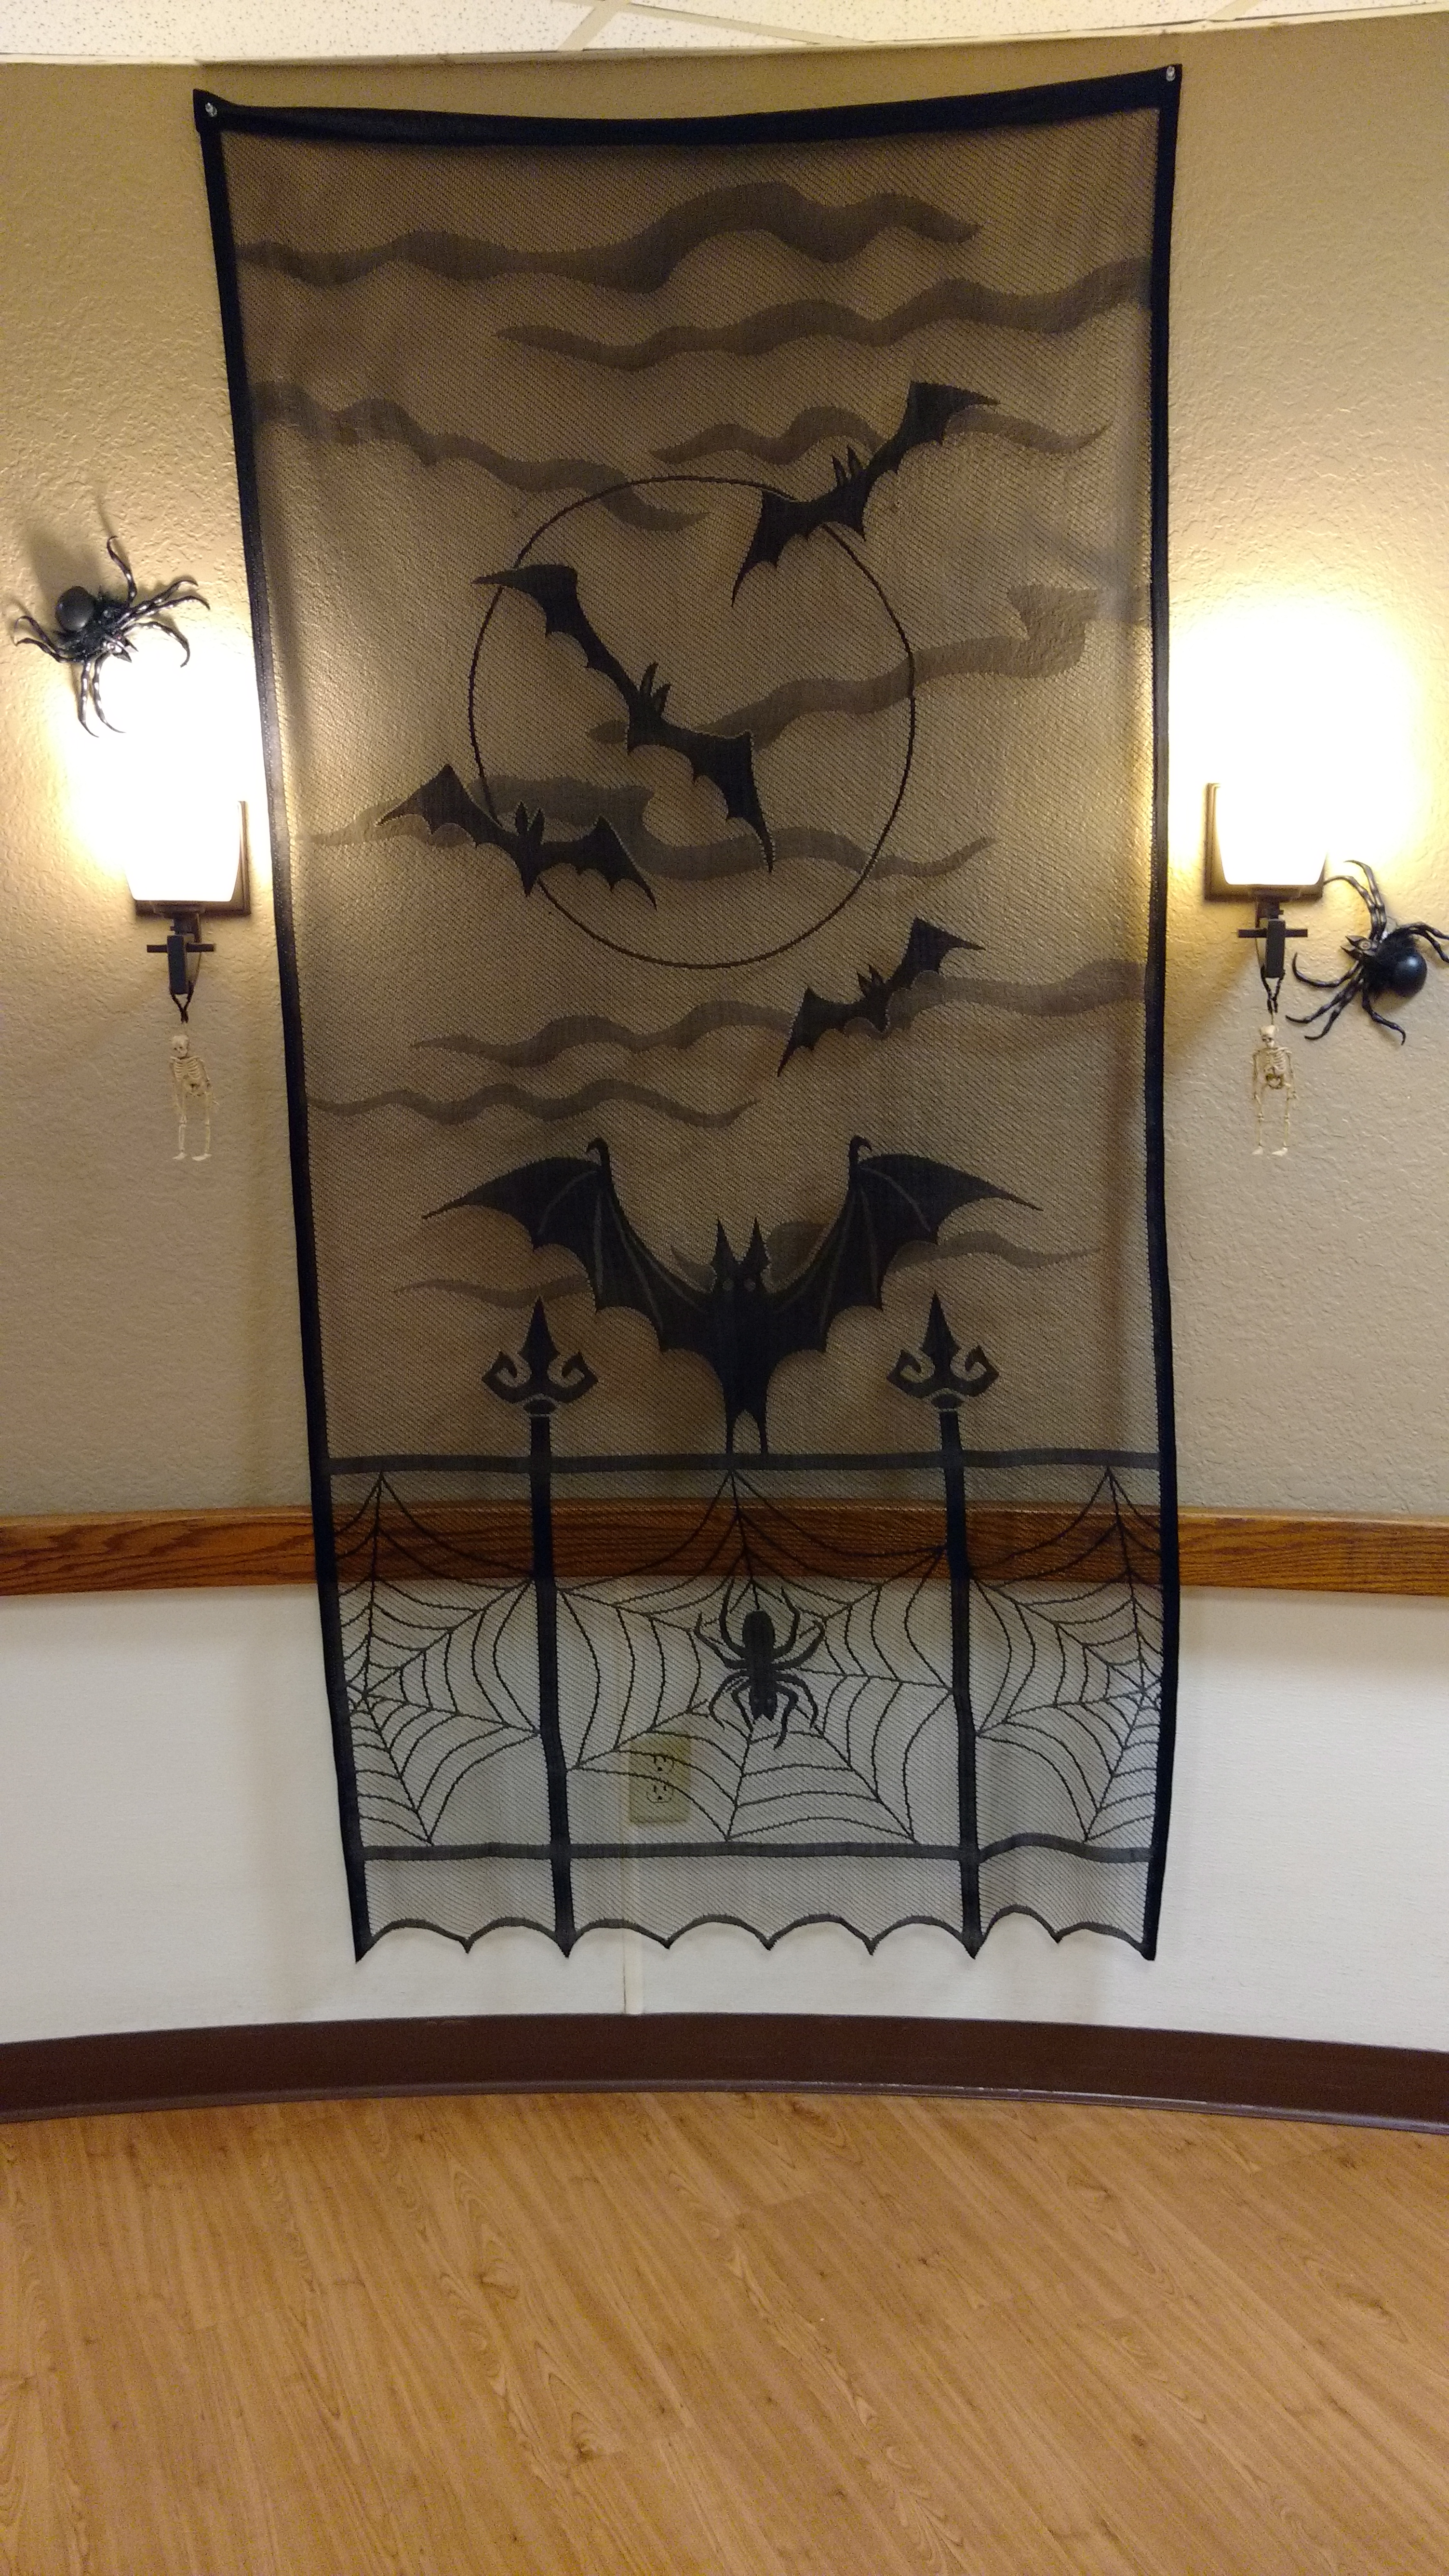 bats and spiders decoration hanging on wall